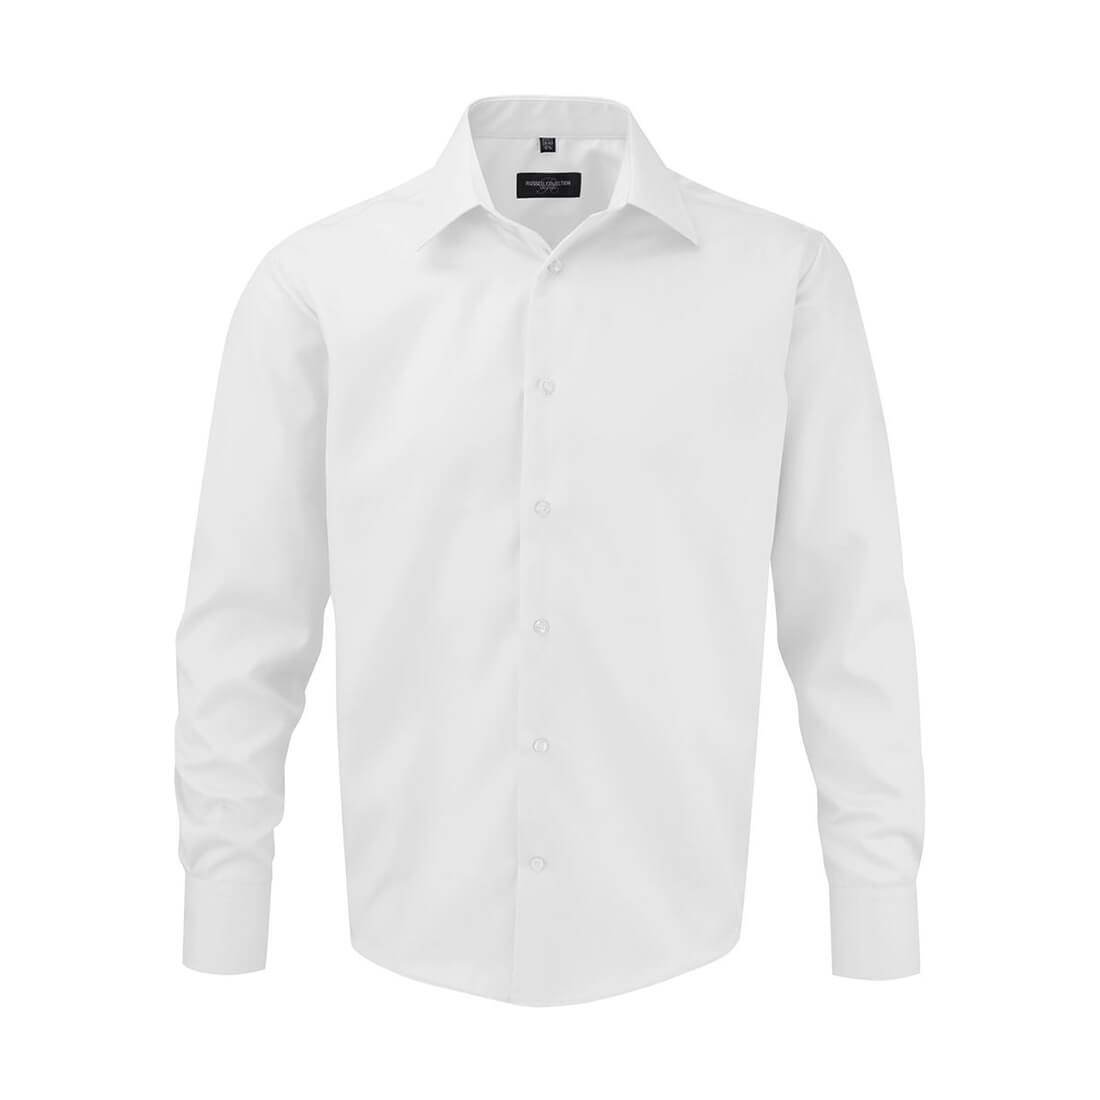 Tailored Ultimate Non-iron Shirt LS - Safetywear